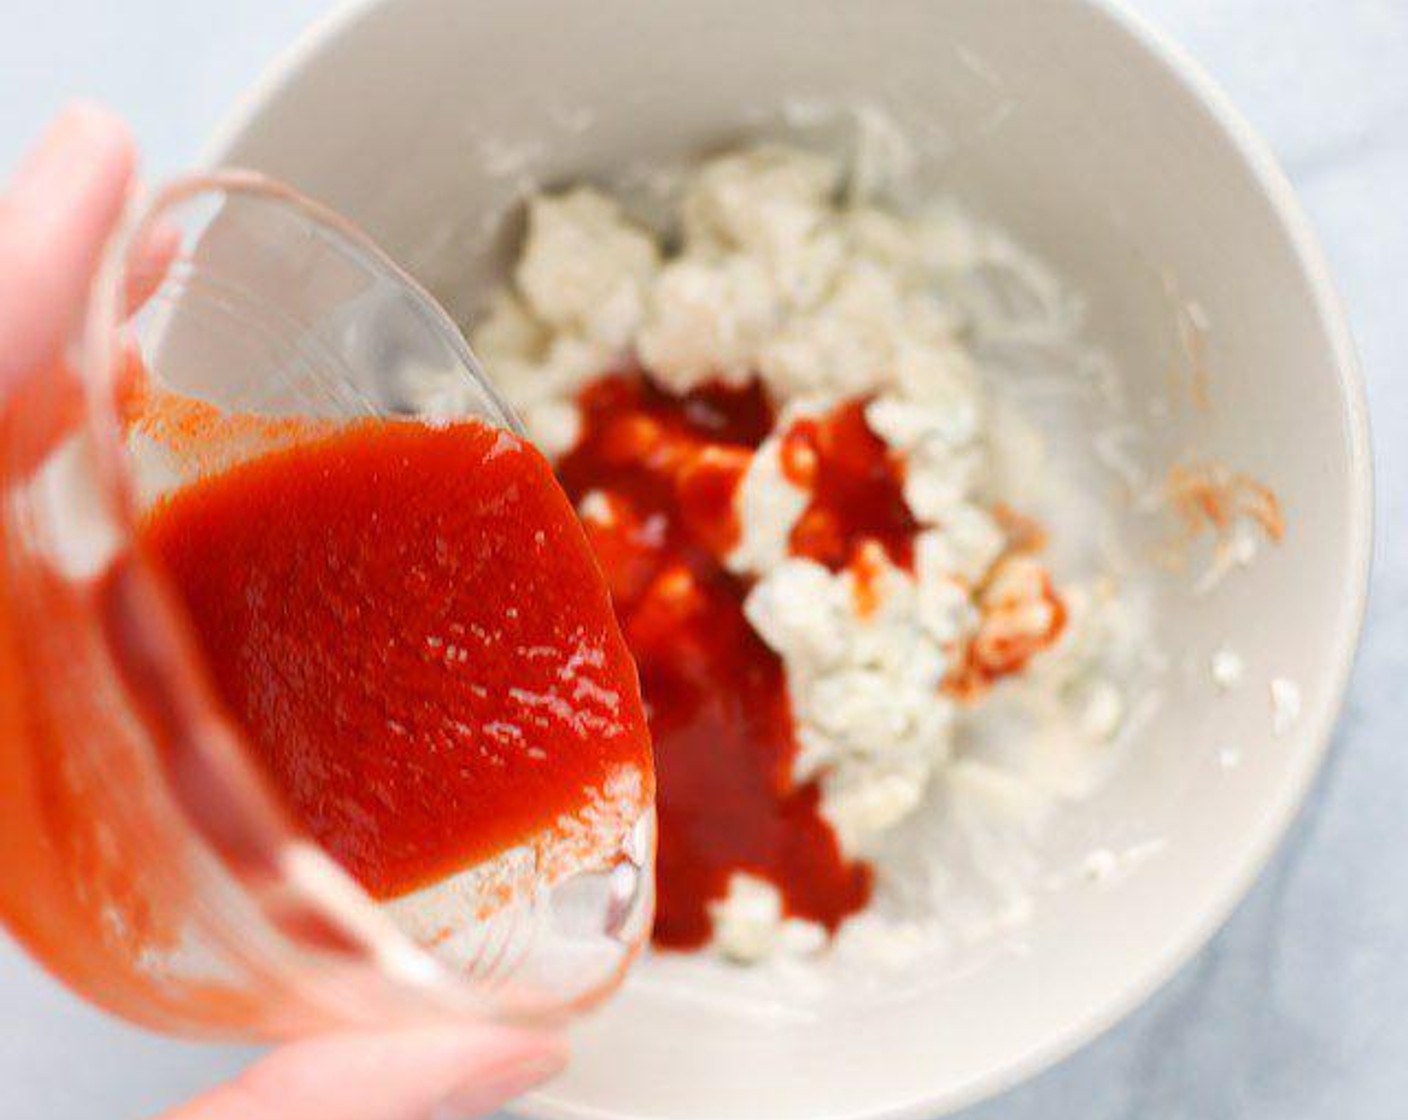 step 1 Mix the Blue Cheese (1/4 cup), Mayonnaise (2 Tbsp) and Buffalo Sauce (2 Tbsp) in a small bowl. Buffalo sauce and mayonnaise don't always combine together easily. The trick is to slowly add the buffalo sauce and incorporate a little at a time to the other ingredients. Mix until consistent in color.